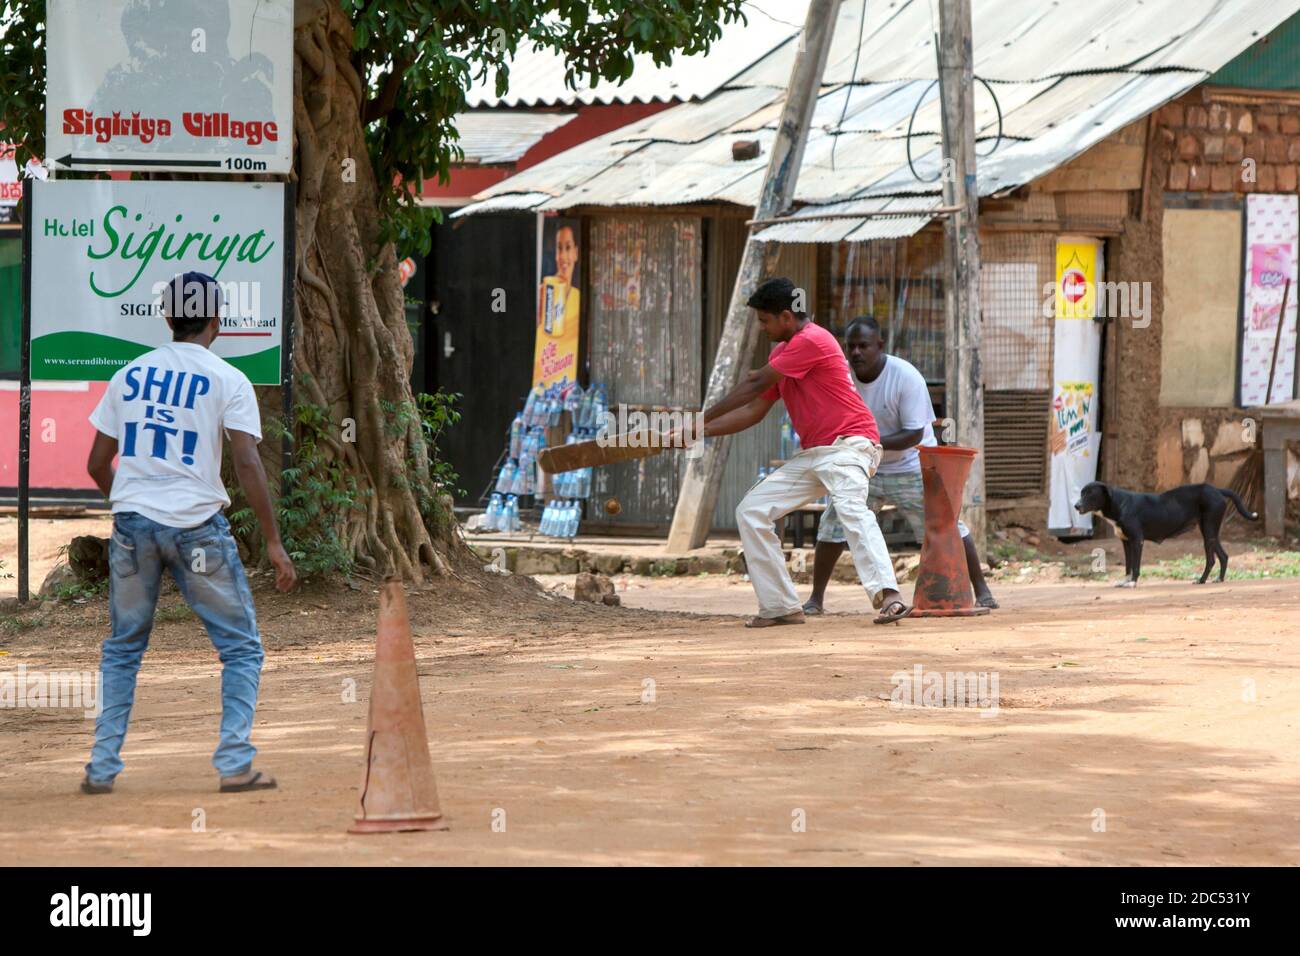 Men playing cricket on a dirt pitch in the street at Sigiriya in Sri Lanka. Cricket is one of the most popular sports in Sri Lanka. Stock Photo